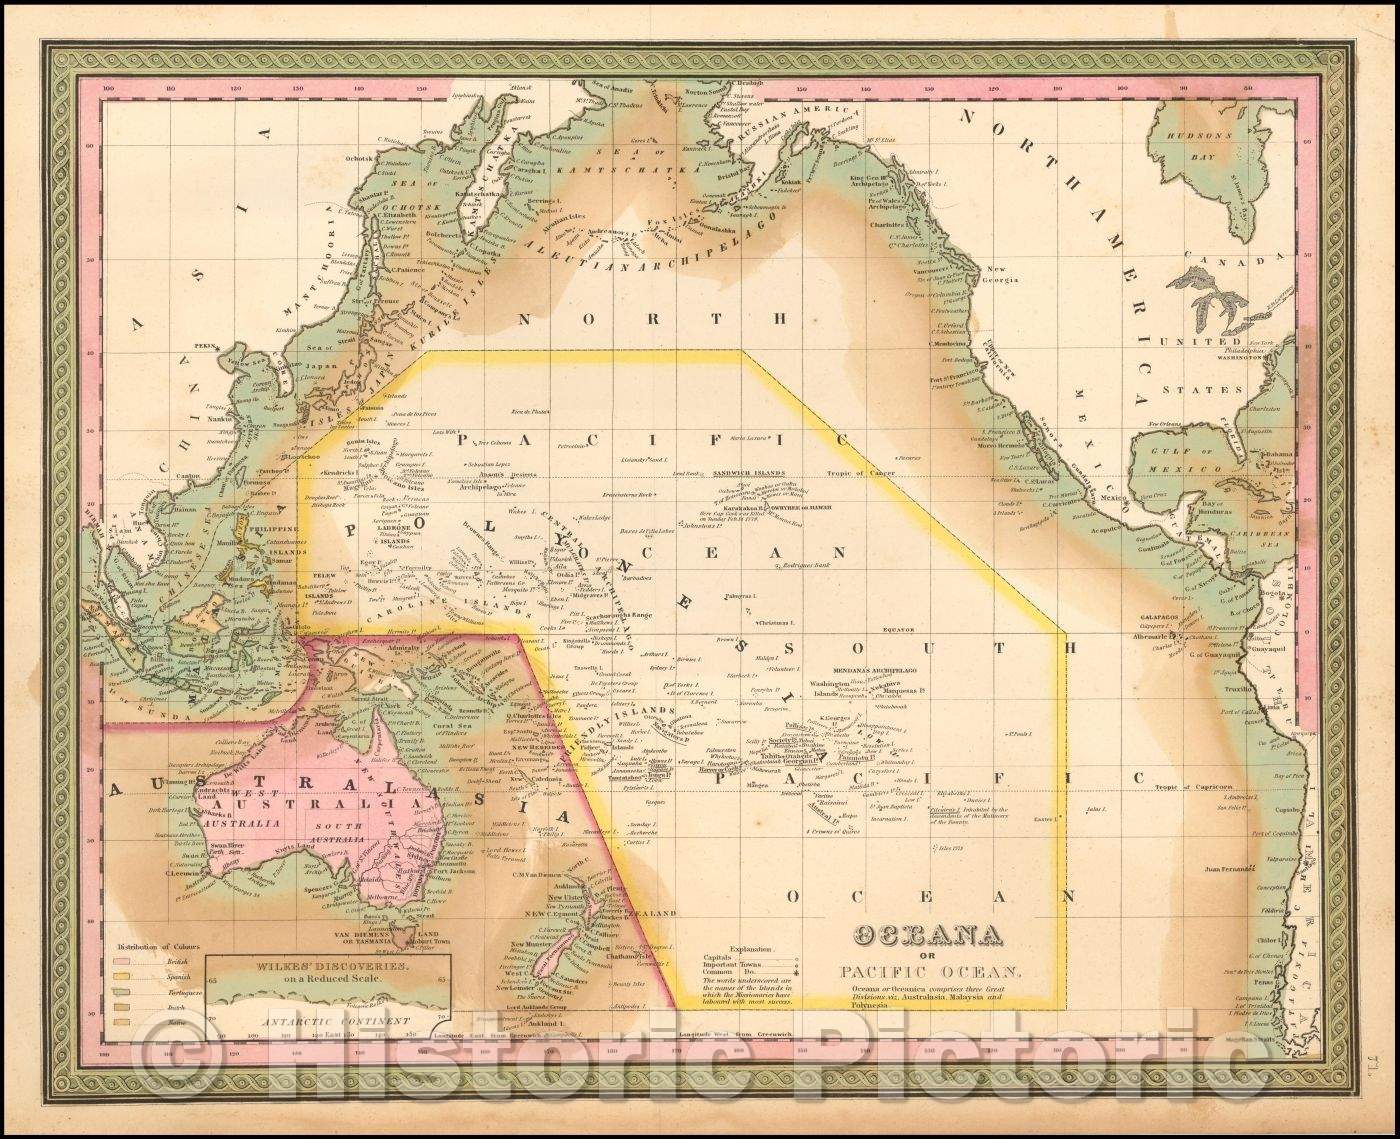 Historic Map - The Pacific Ocean Including Oceana with its several Divisions, Islands, Groups, 1850, Samuel Augustus Mitchell - Vintage Wall Art